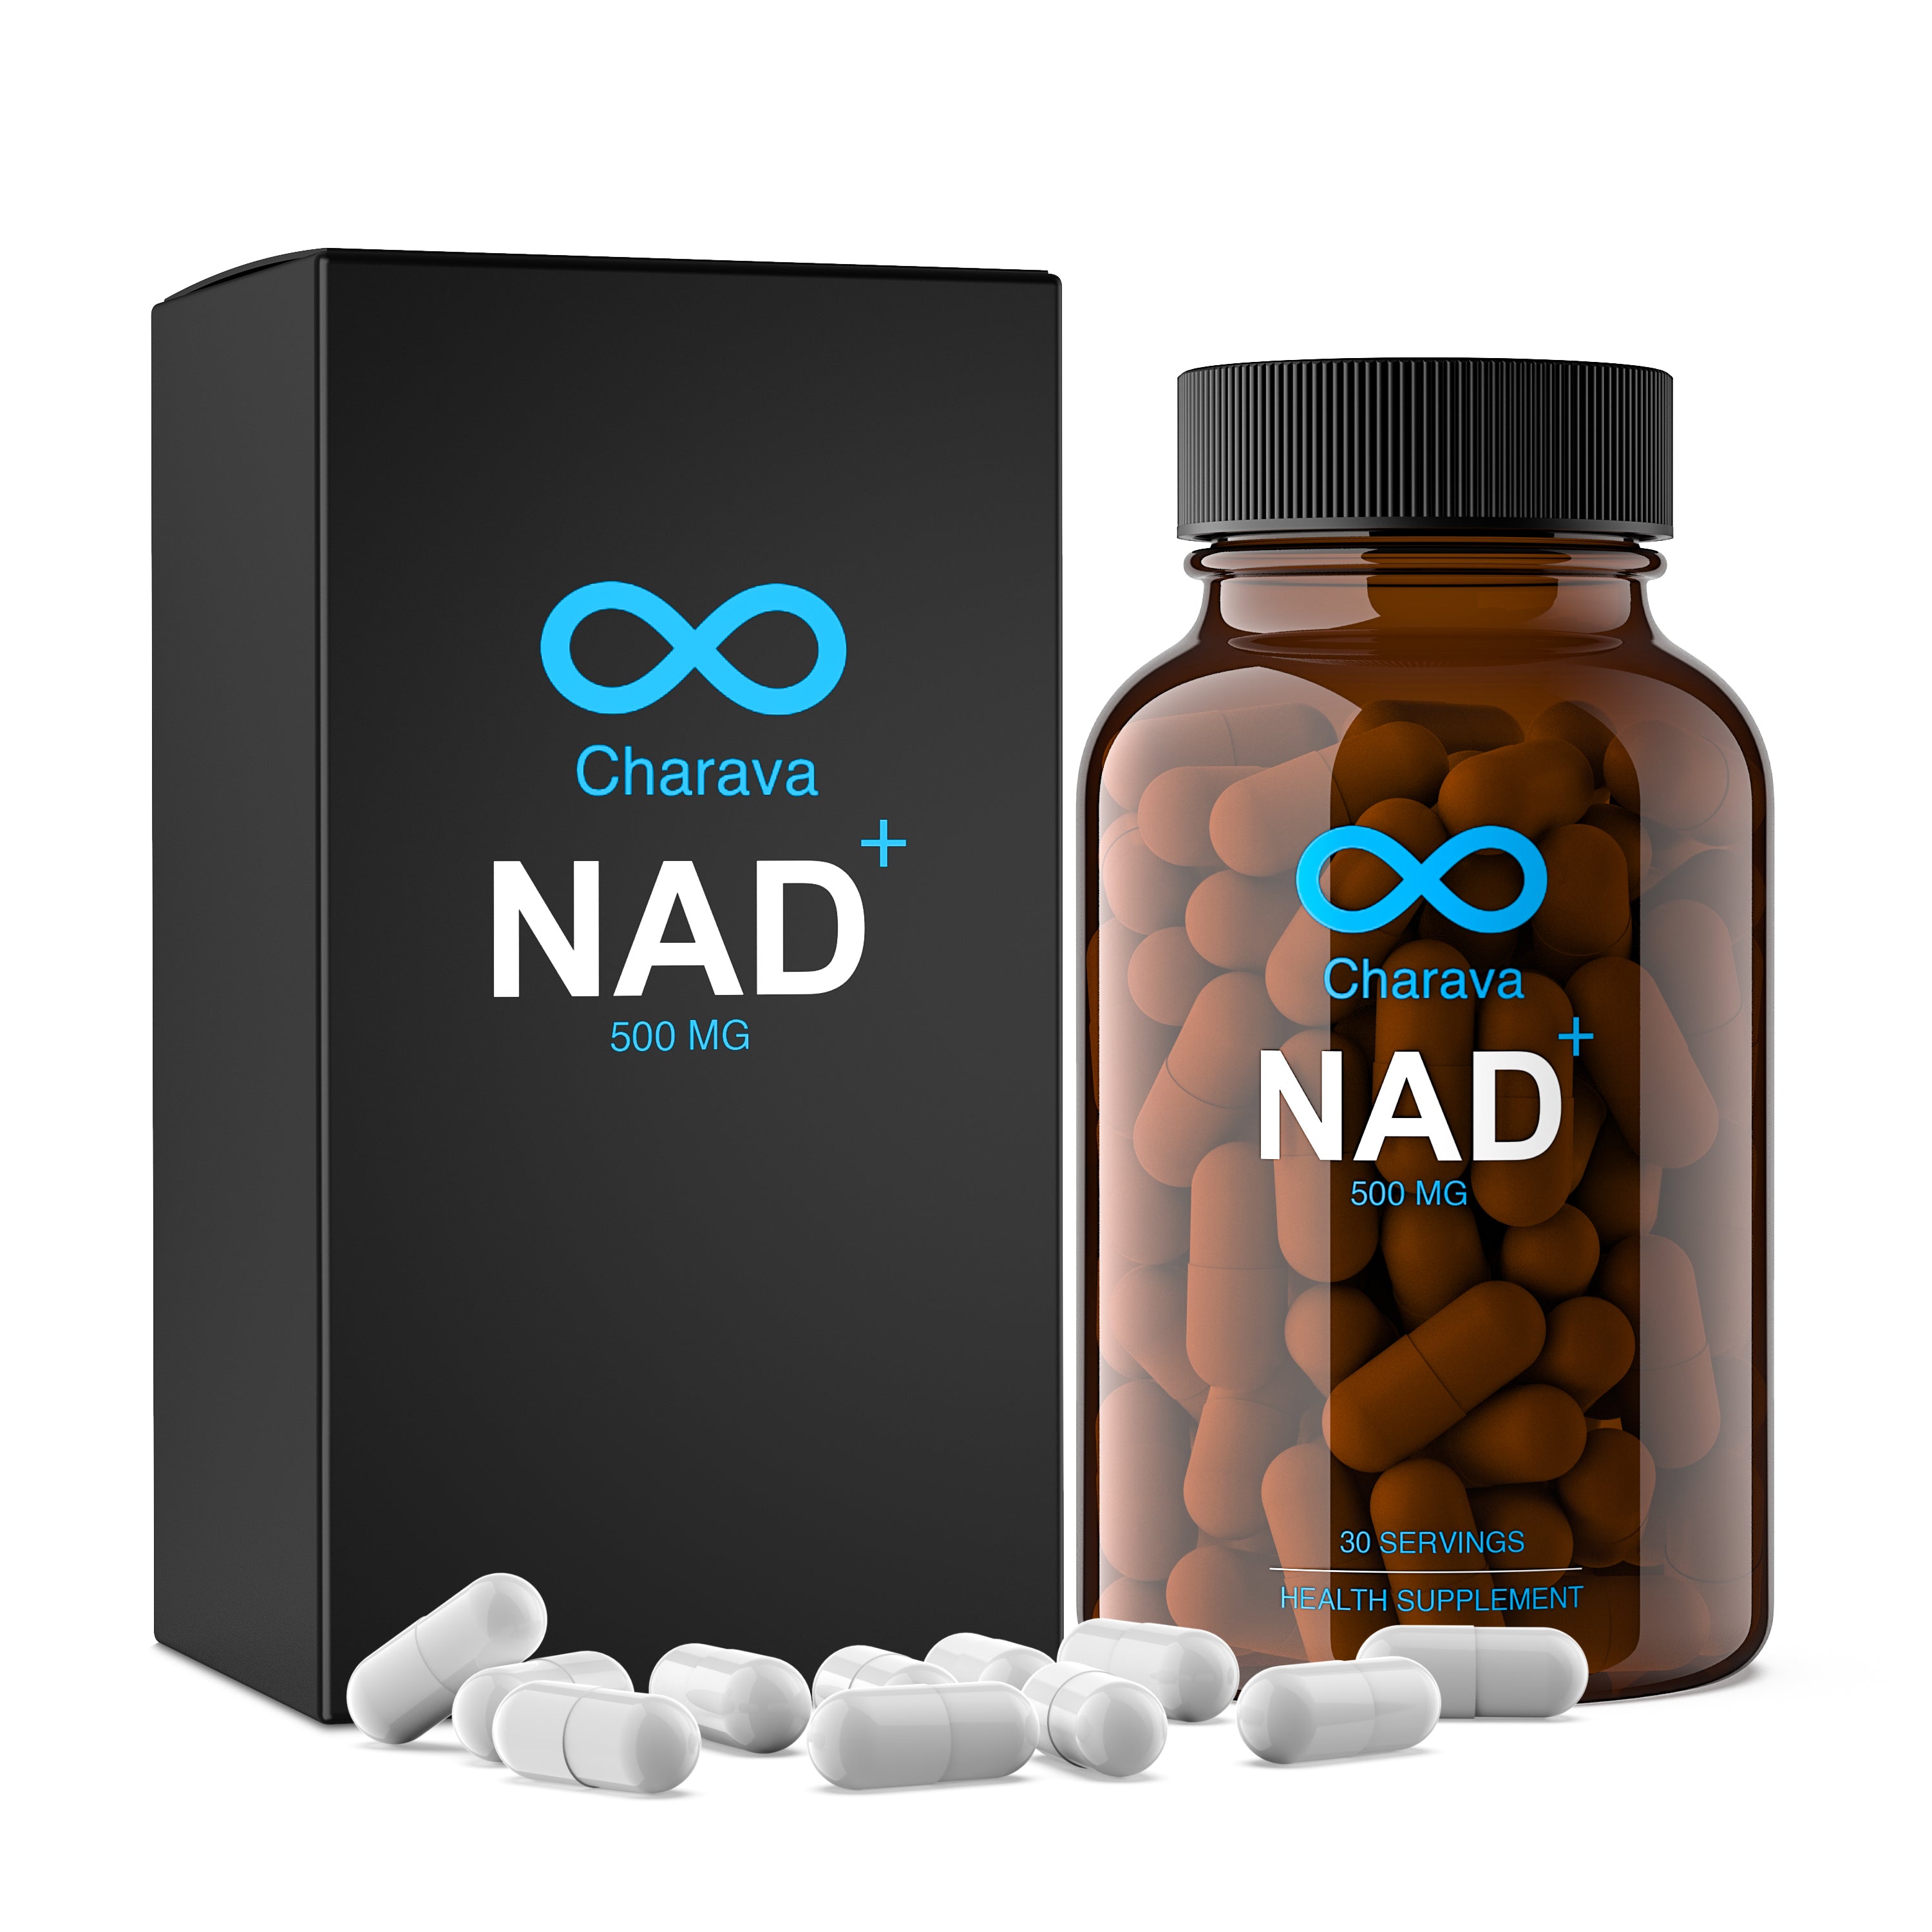 Charava NAD+ 500mg - NAD Supplements South Africa - Nicotinamide Adenine Dinucleotide